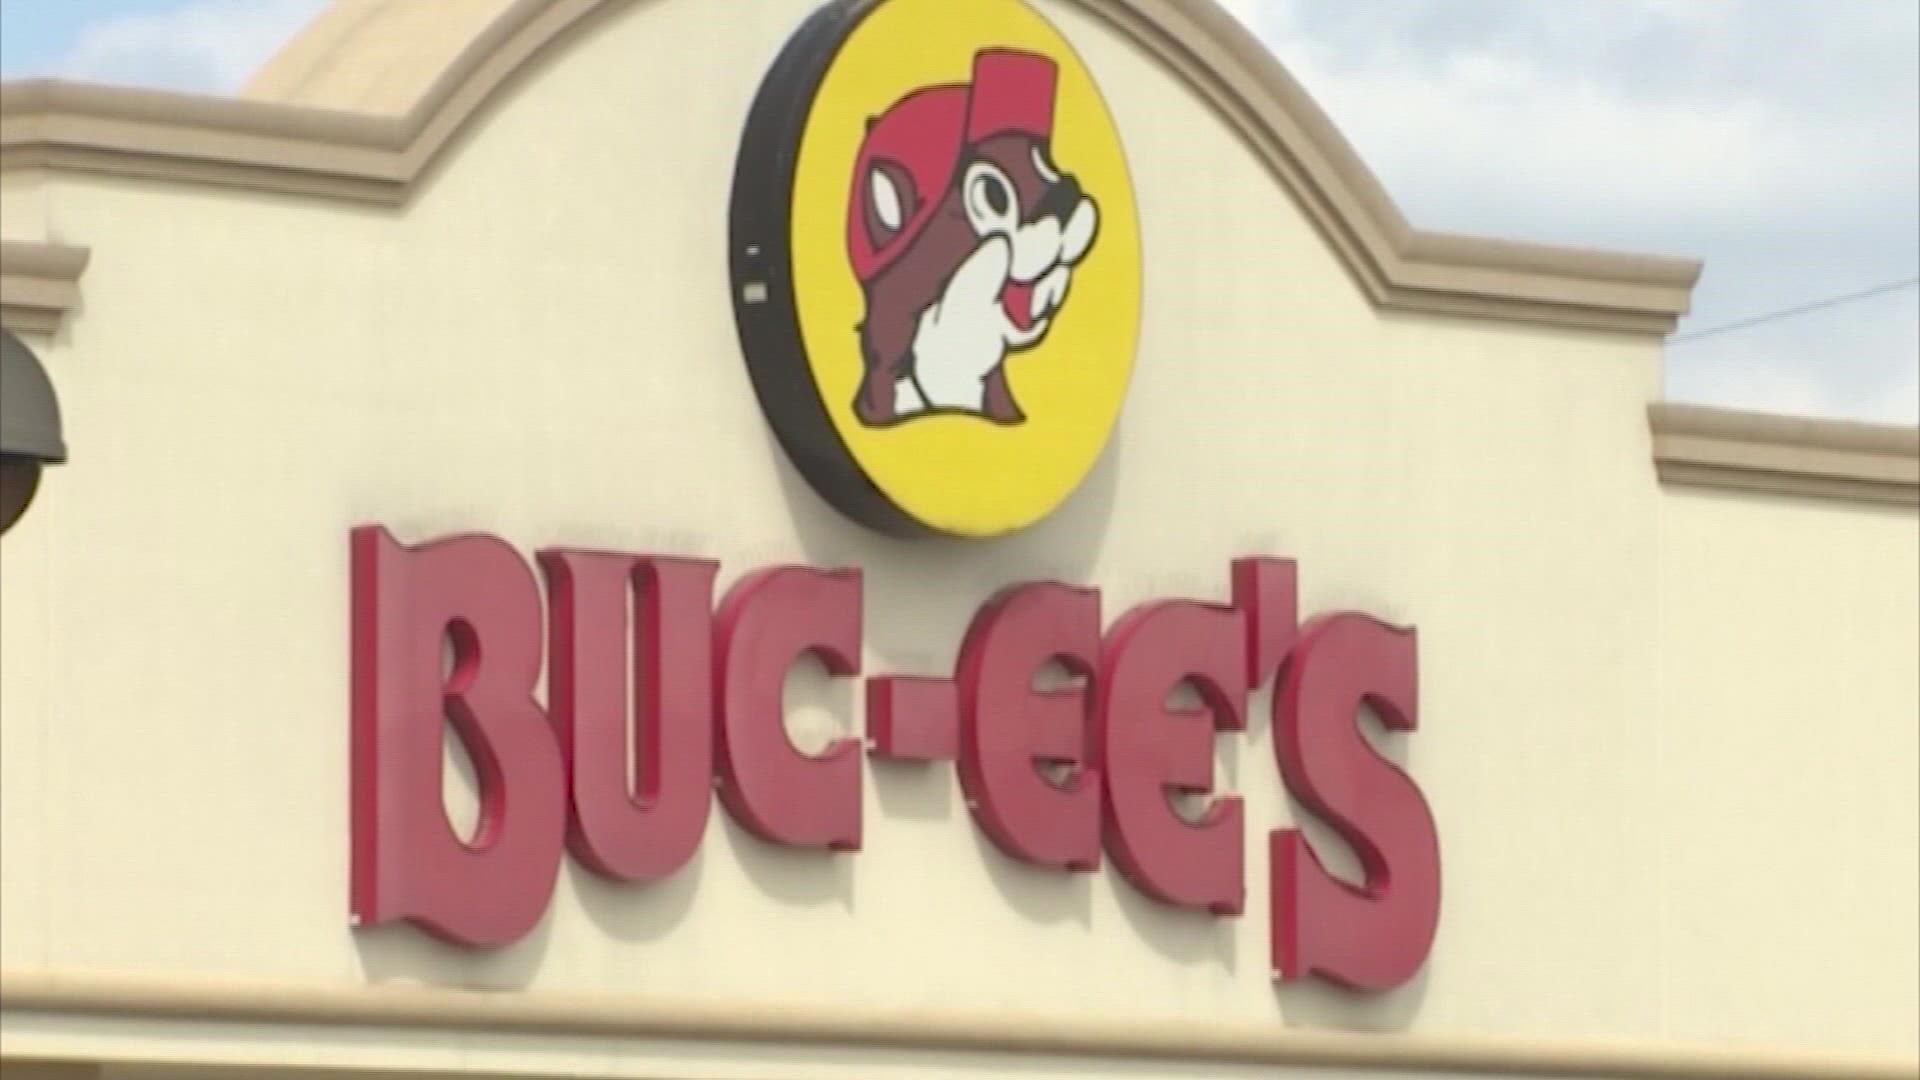 The company sets its eyes northward as Buc-ee's announces it will open its first location in Colorado.